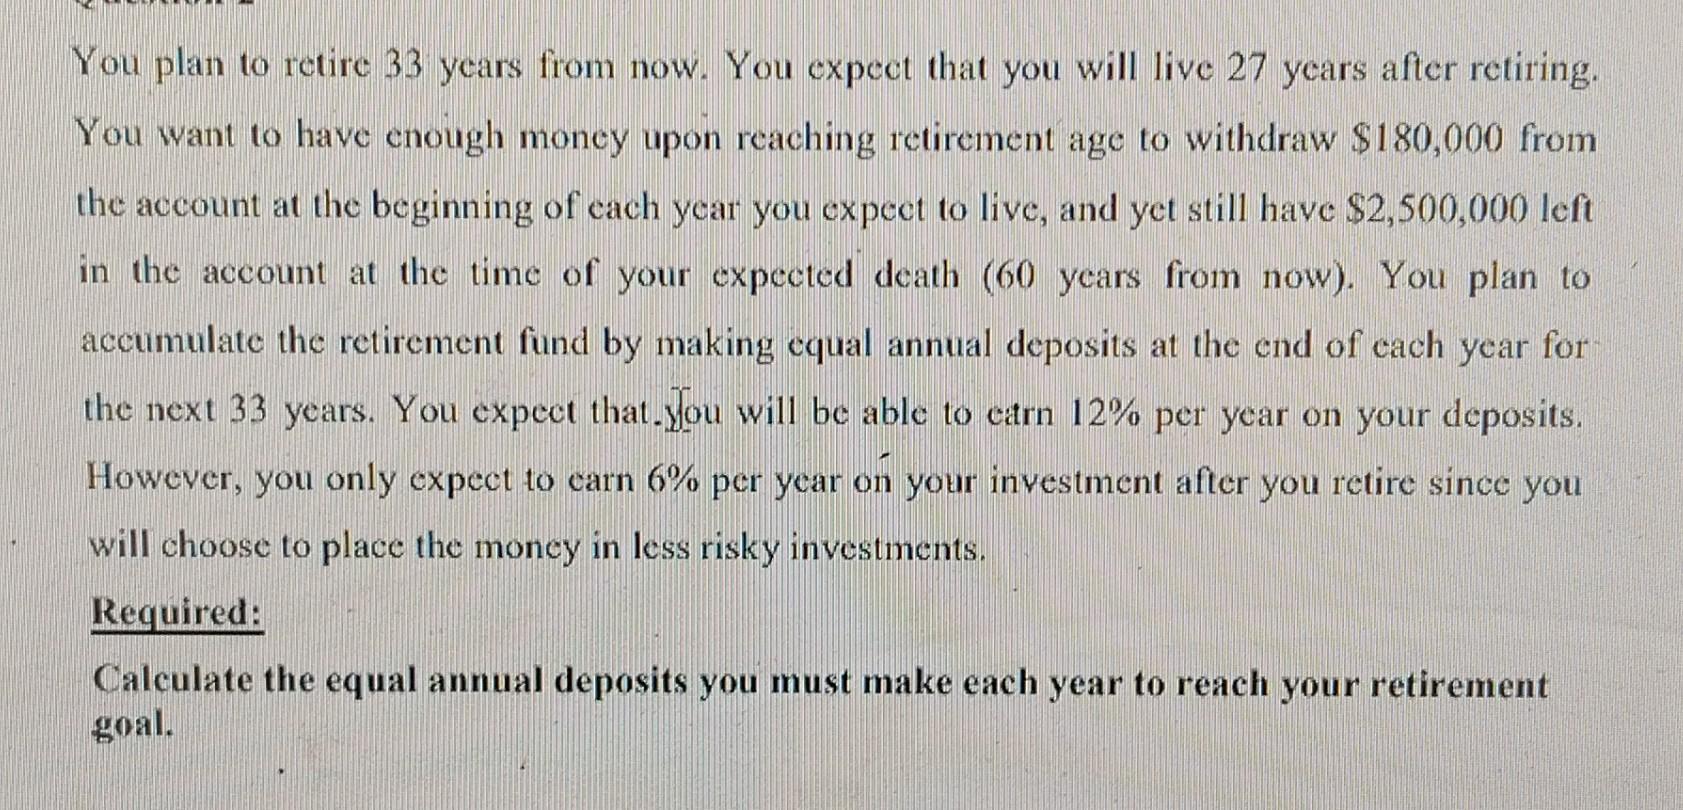 You plan to retire 33 years from now. You expect that you will live 27 years after retiring. You want to have